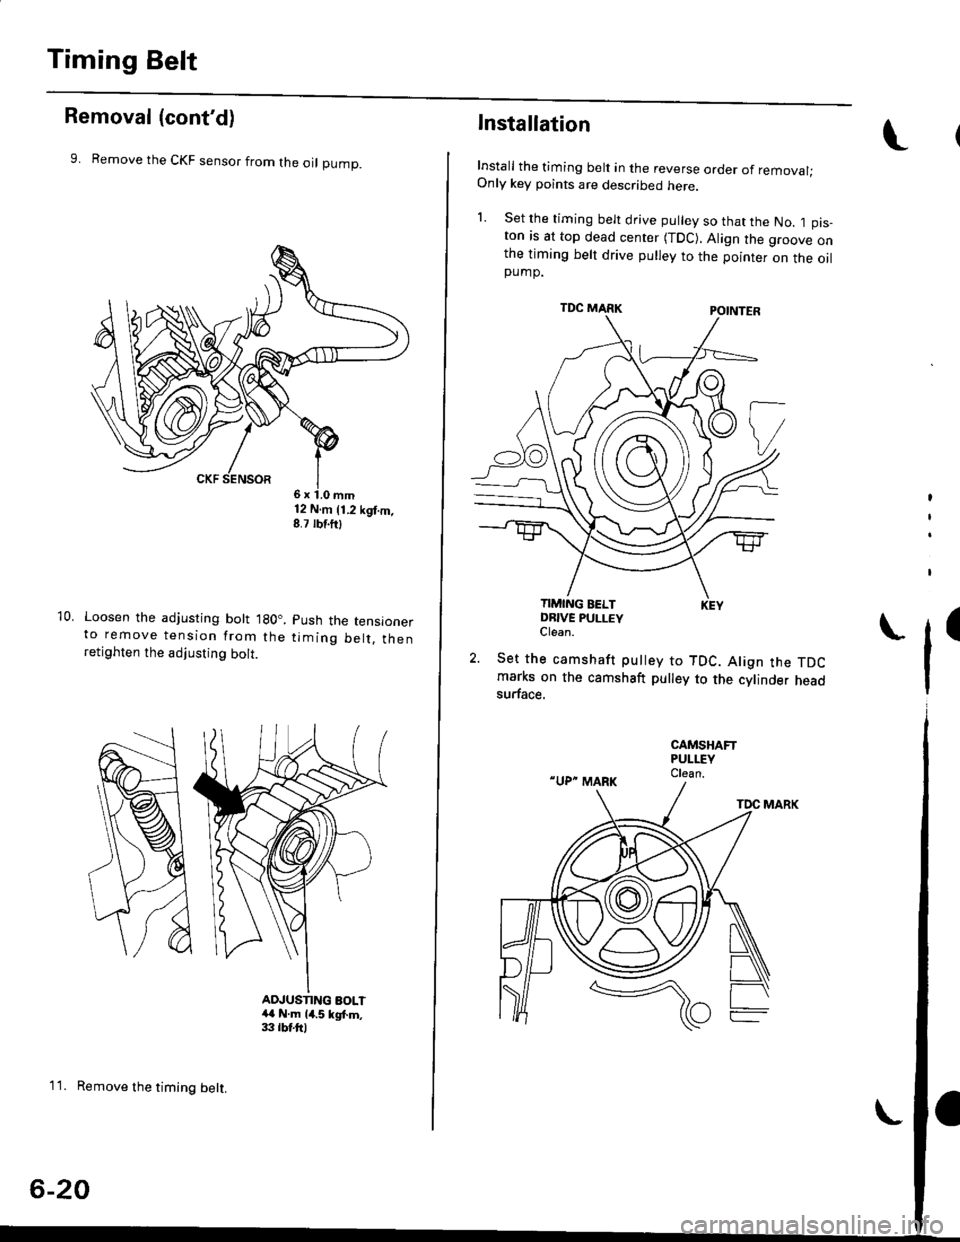 HONDA CIVIC 1996 6.G Workshop Manual Timing Belt
Removal (contd)
9. Remove the CKF sensor from the oI pump.
10. Loosen the adjusting bott lgO..to remove tension from theretighten the adjusting bolt.
12 N.m 11.2 kgt.m,8.7 rbf.ftl
Push th